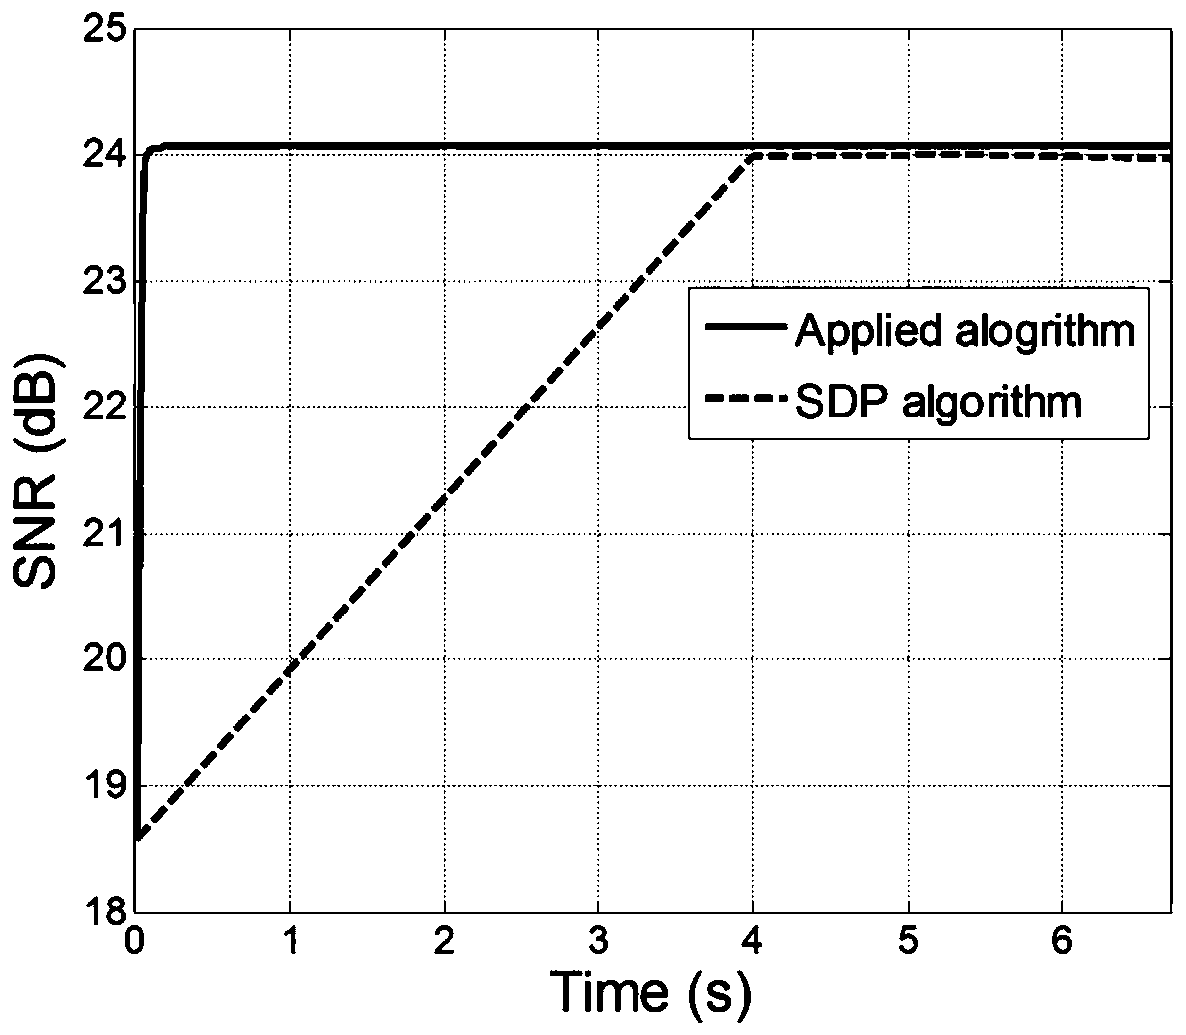 A Robust Design Method for Slow Time Series under Independent Disturbance Environment